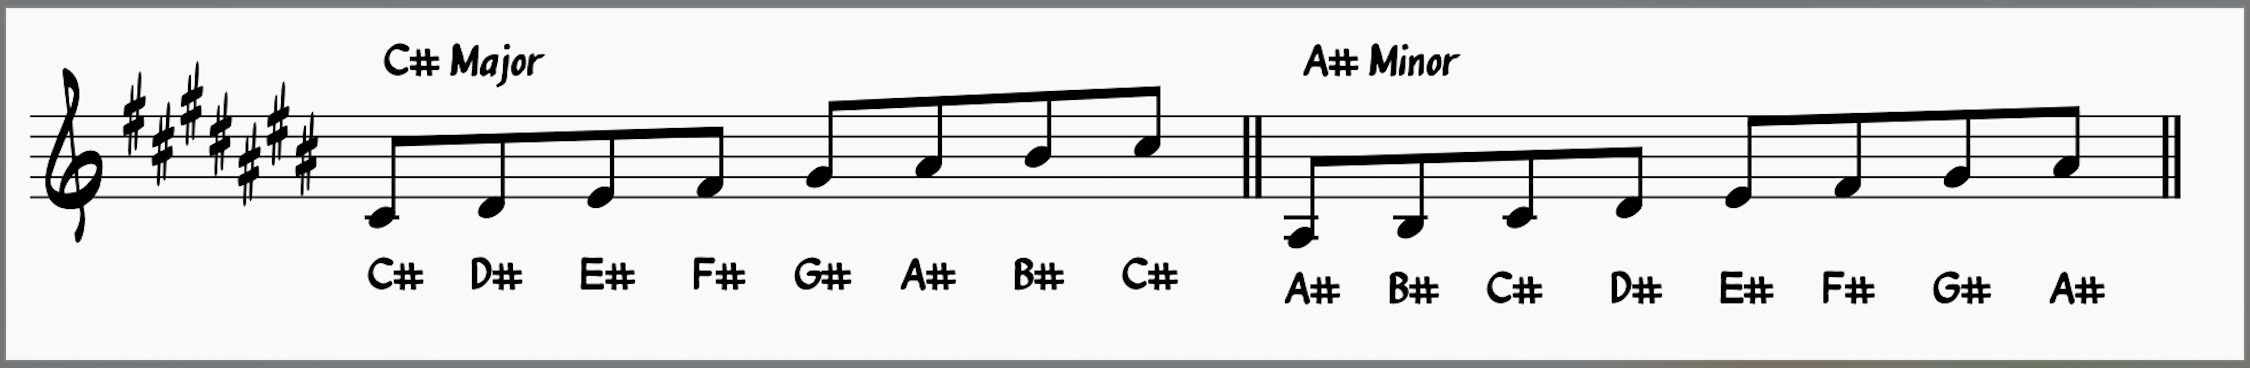 C# Major and A# Minor